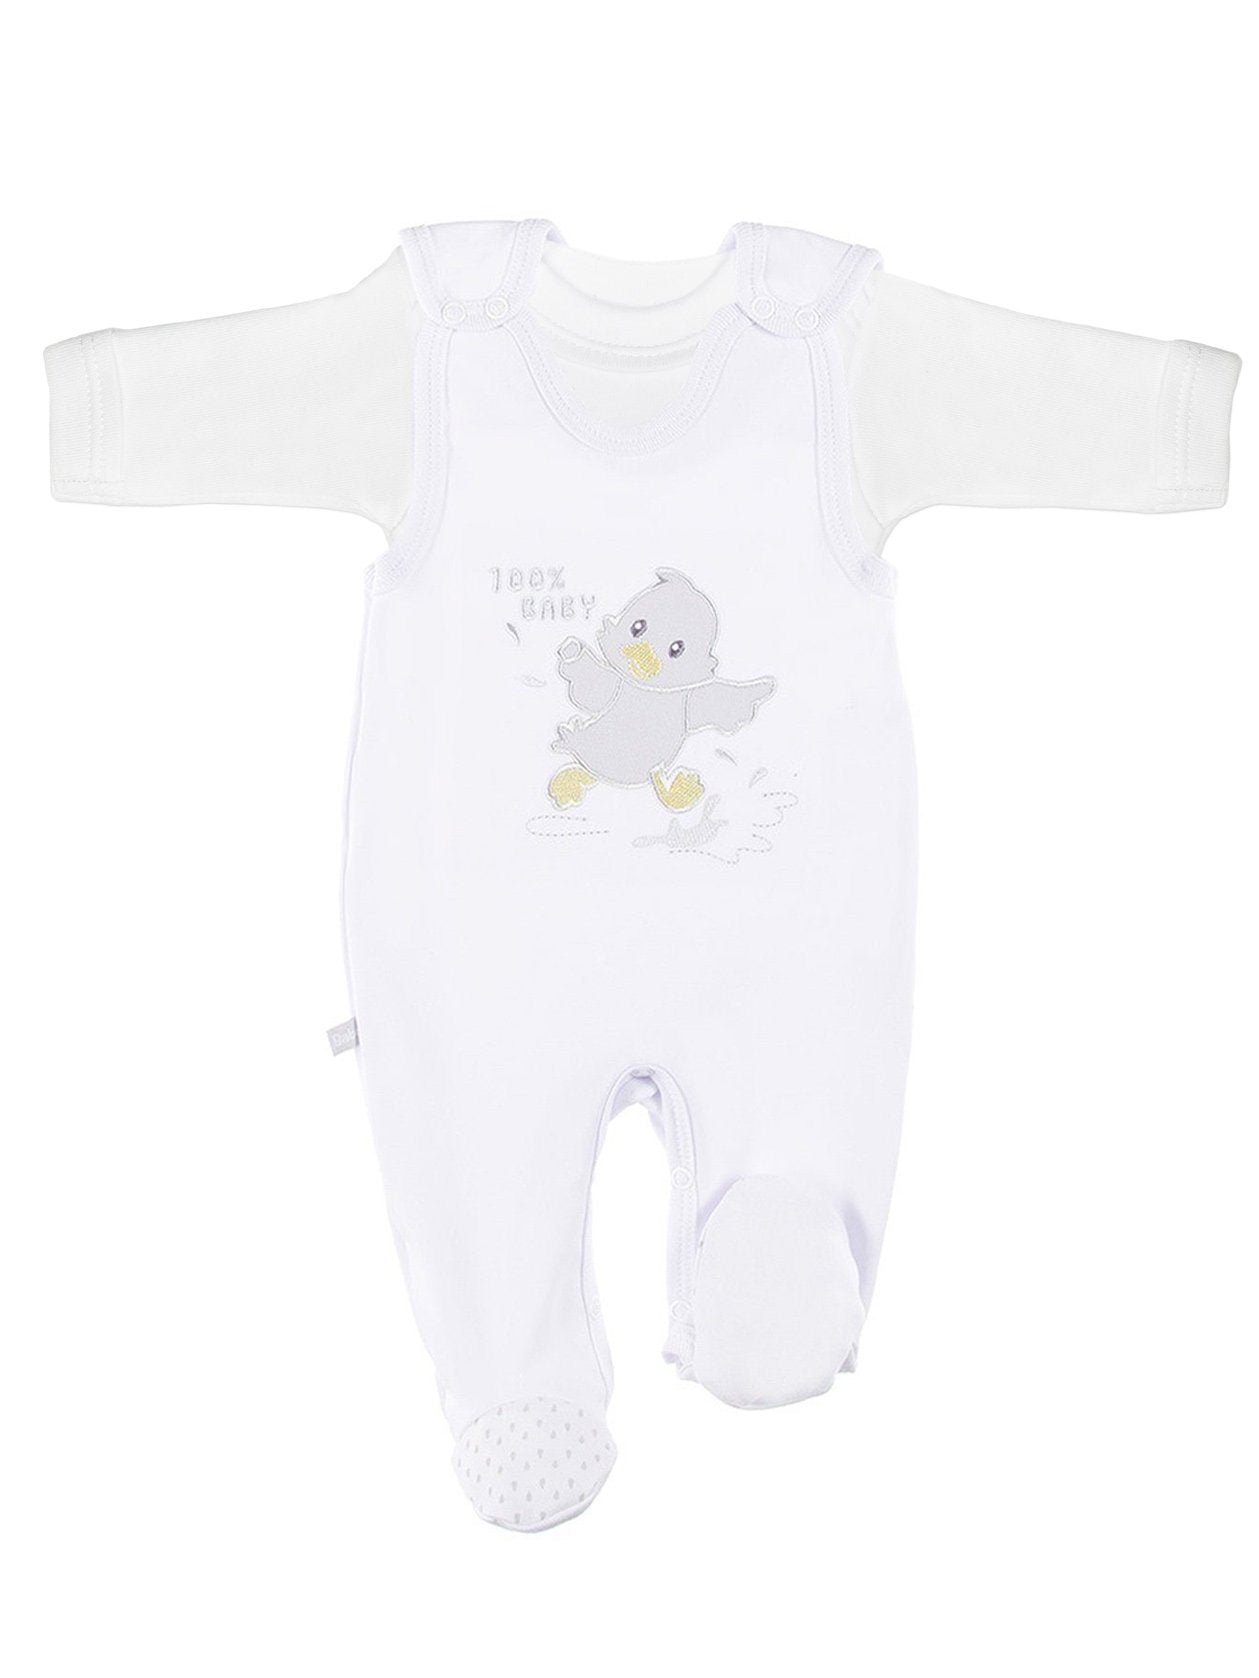 Early Baby Top & Chick Footed Dungarees Set - White - Dungaree - EEVI